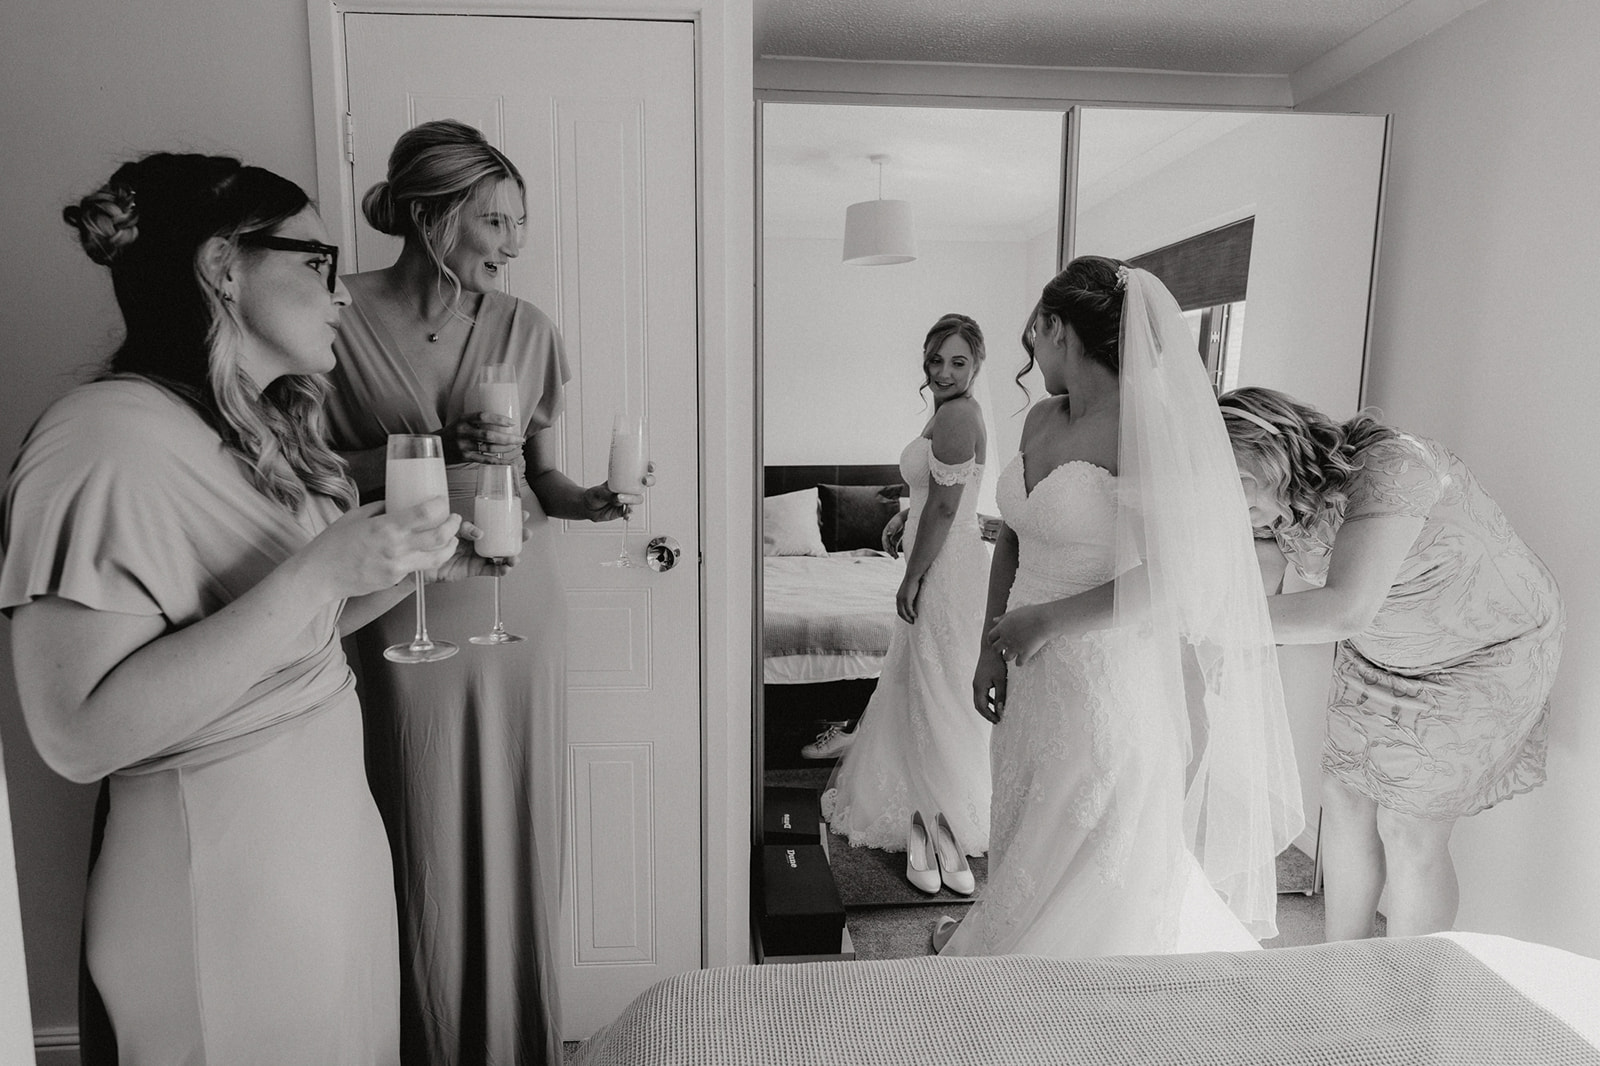 The bride, having a helping hand into her wedding dress